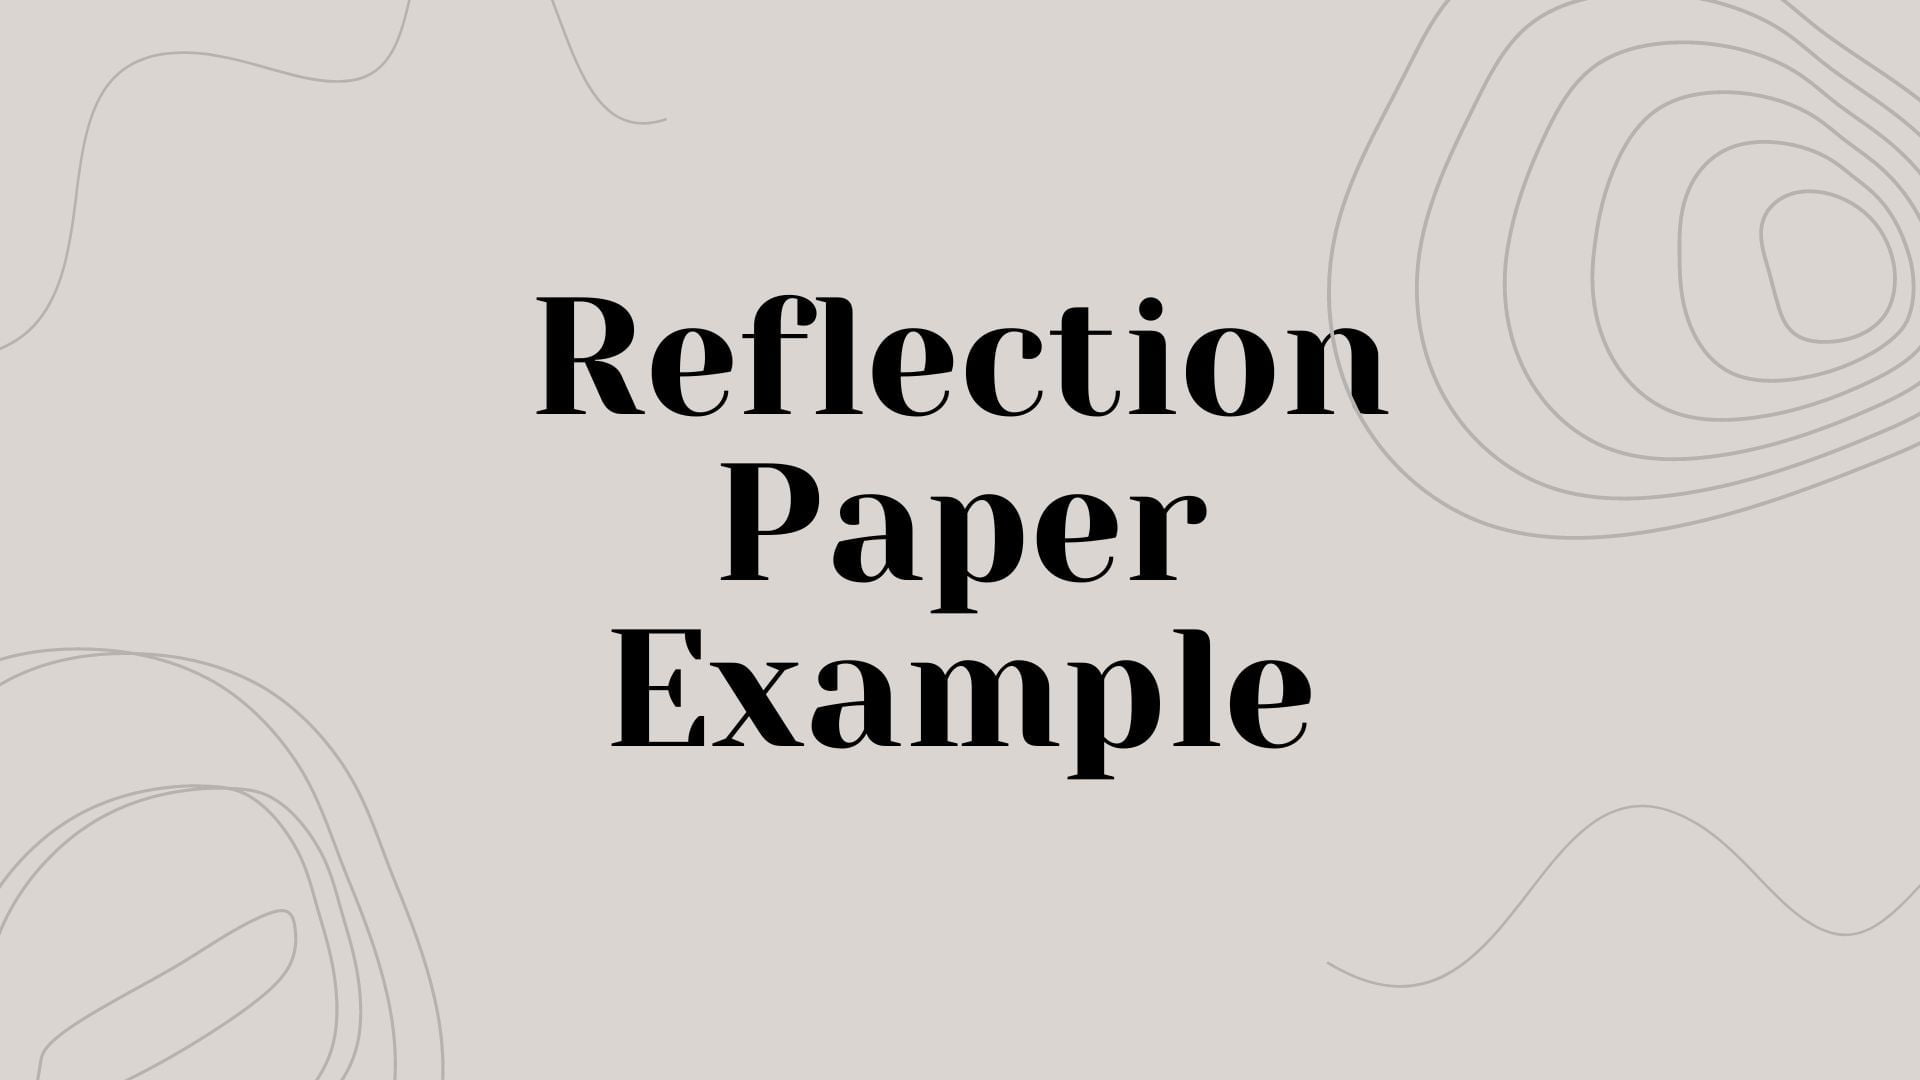 Reflection Paper Example - Understanding reflective essay using a sample